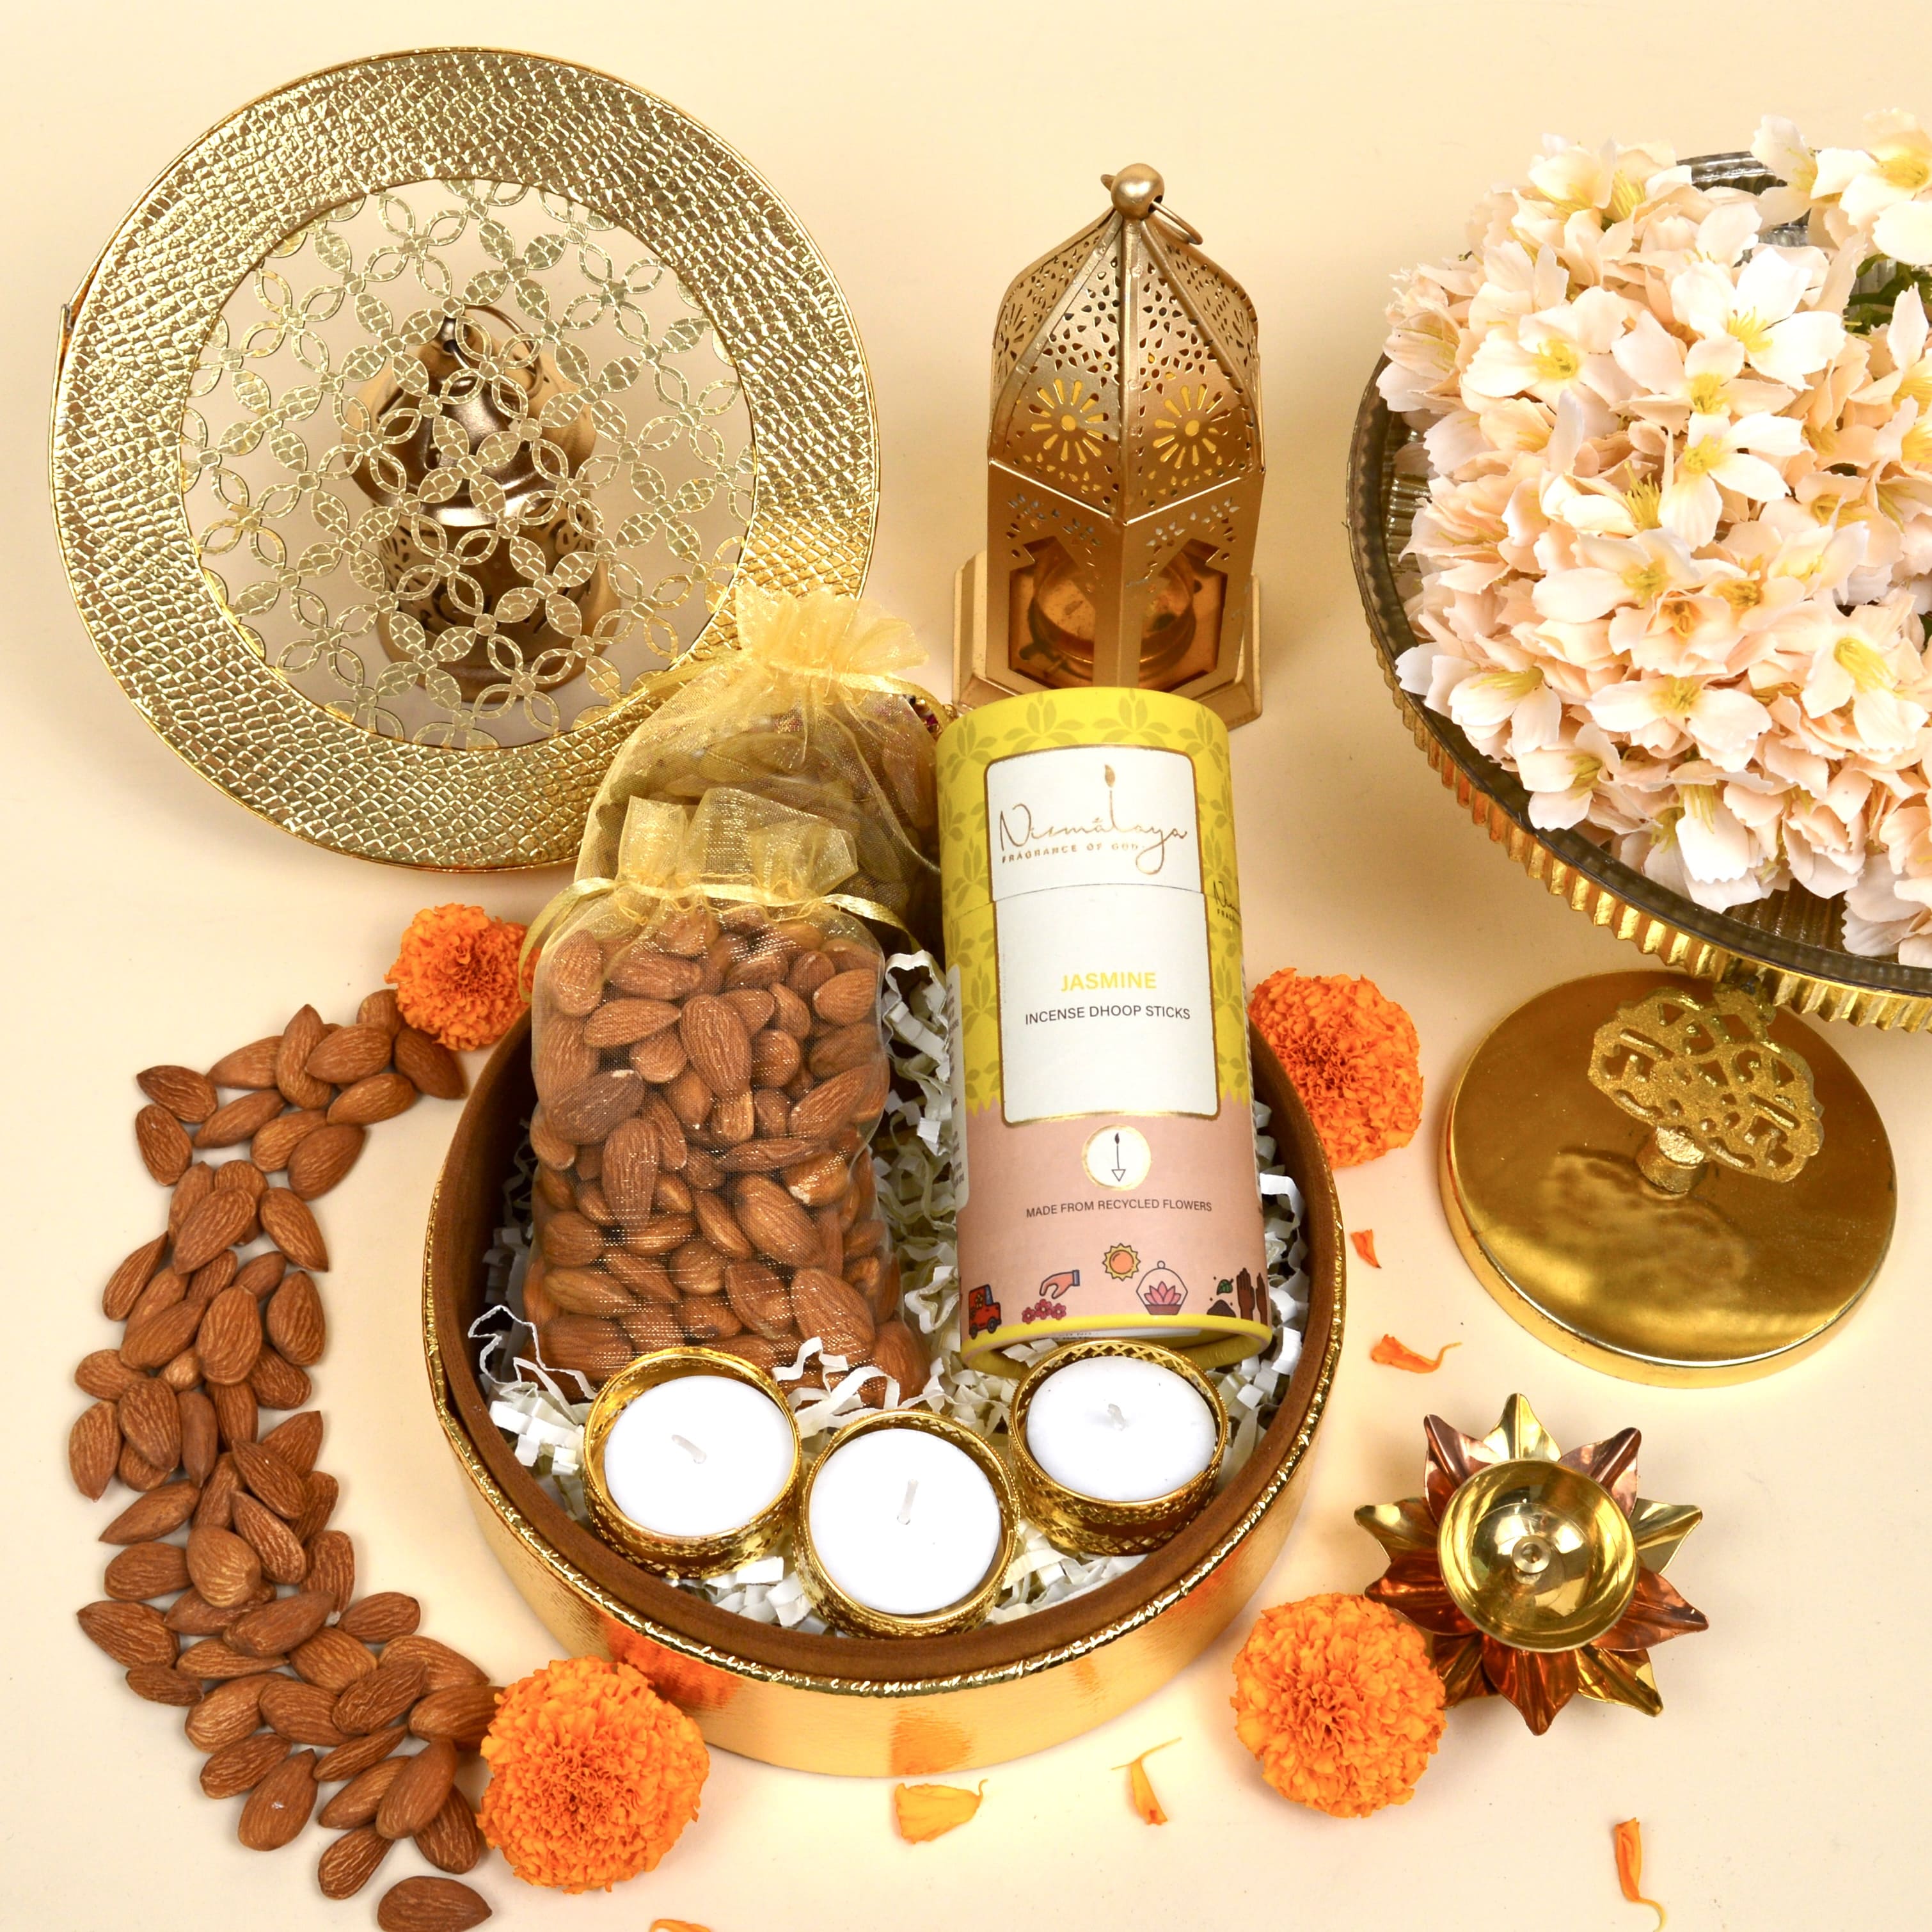 Top 5 Eco-friendly Corporate Gift Hampers for Diwali